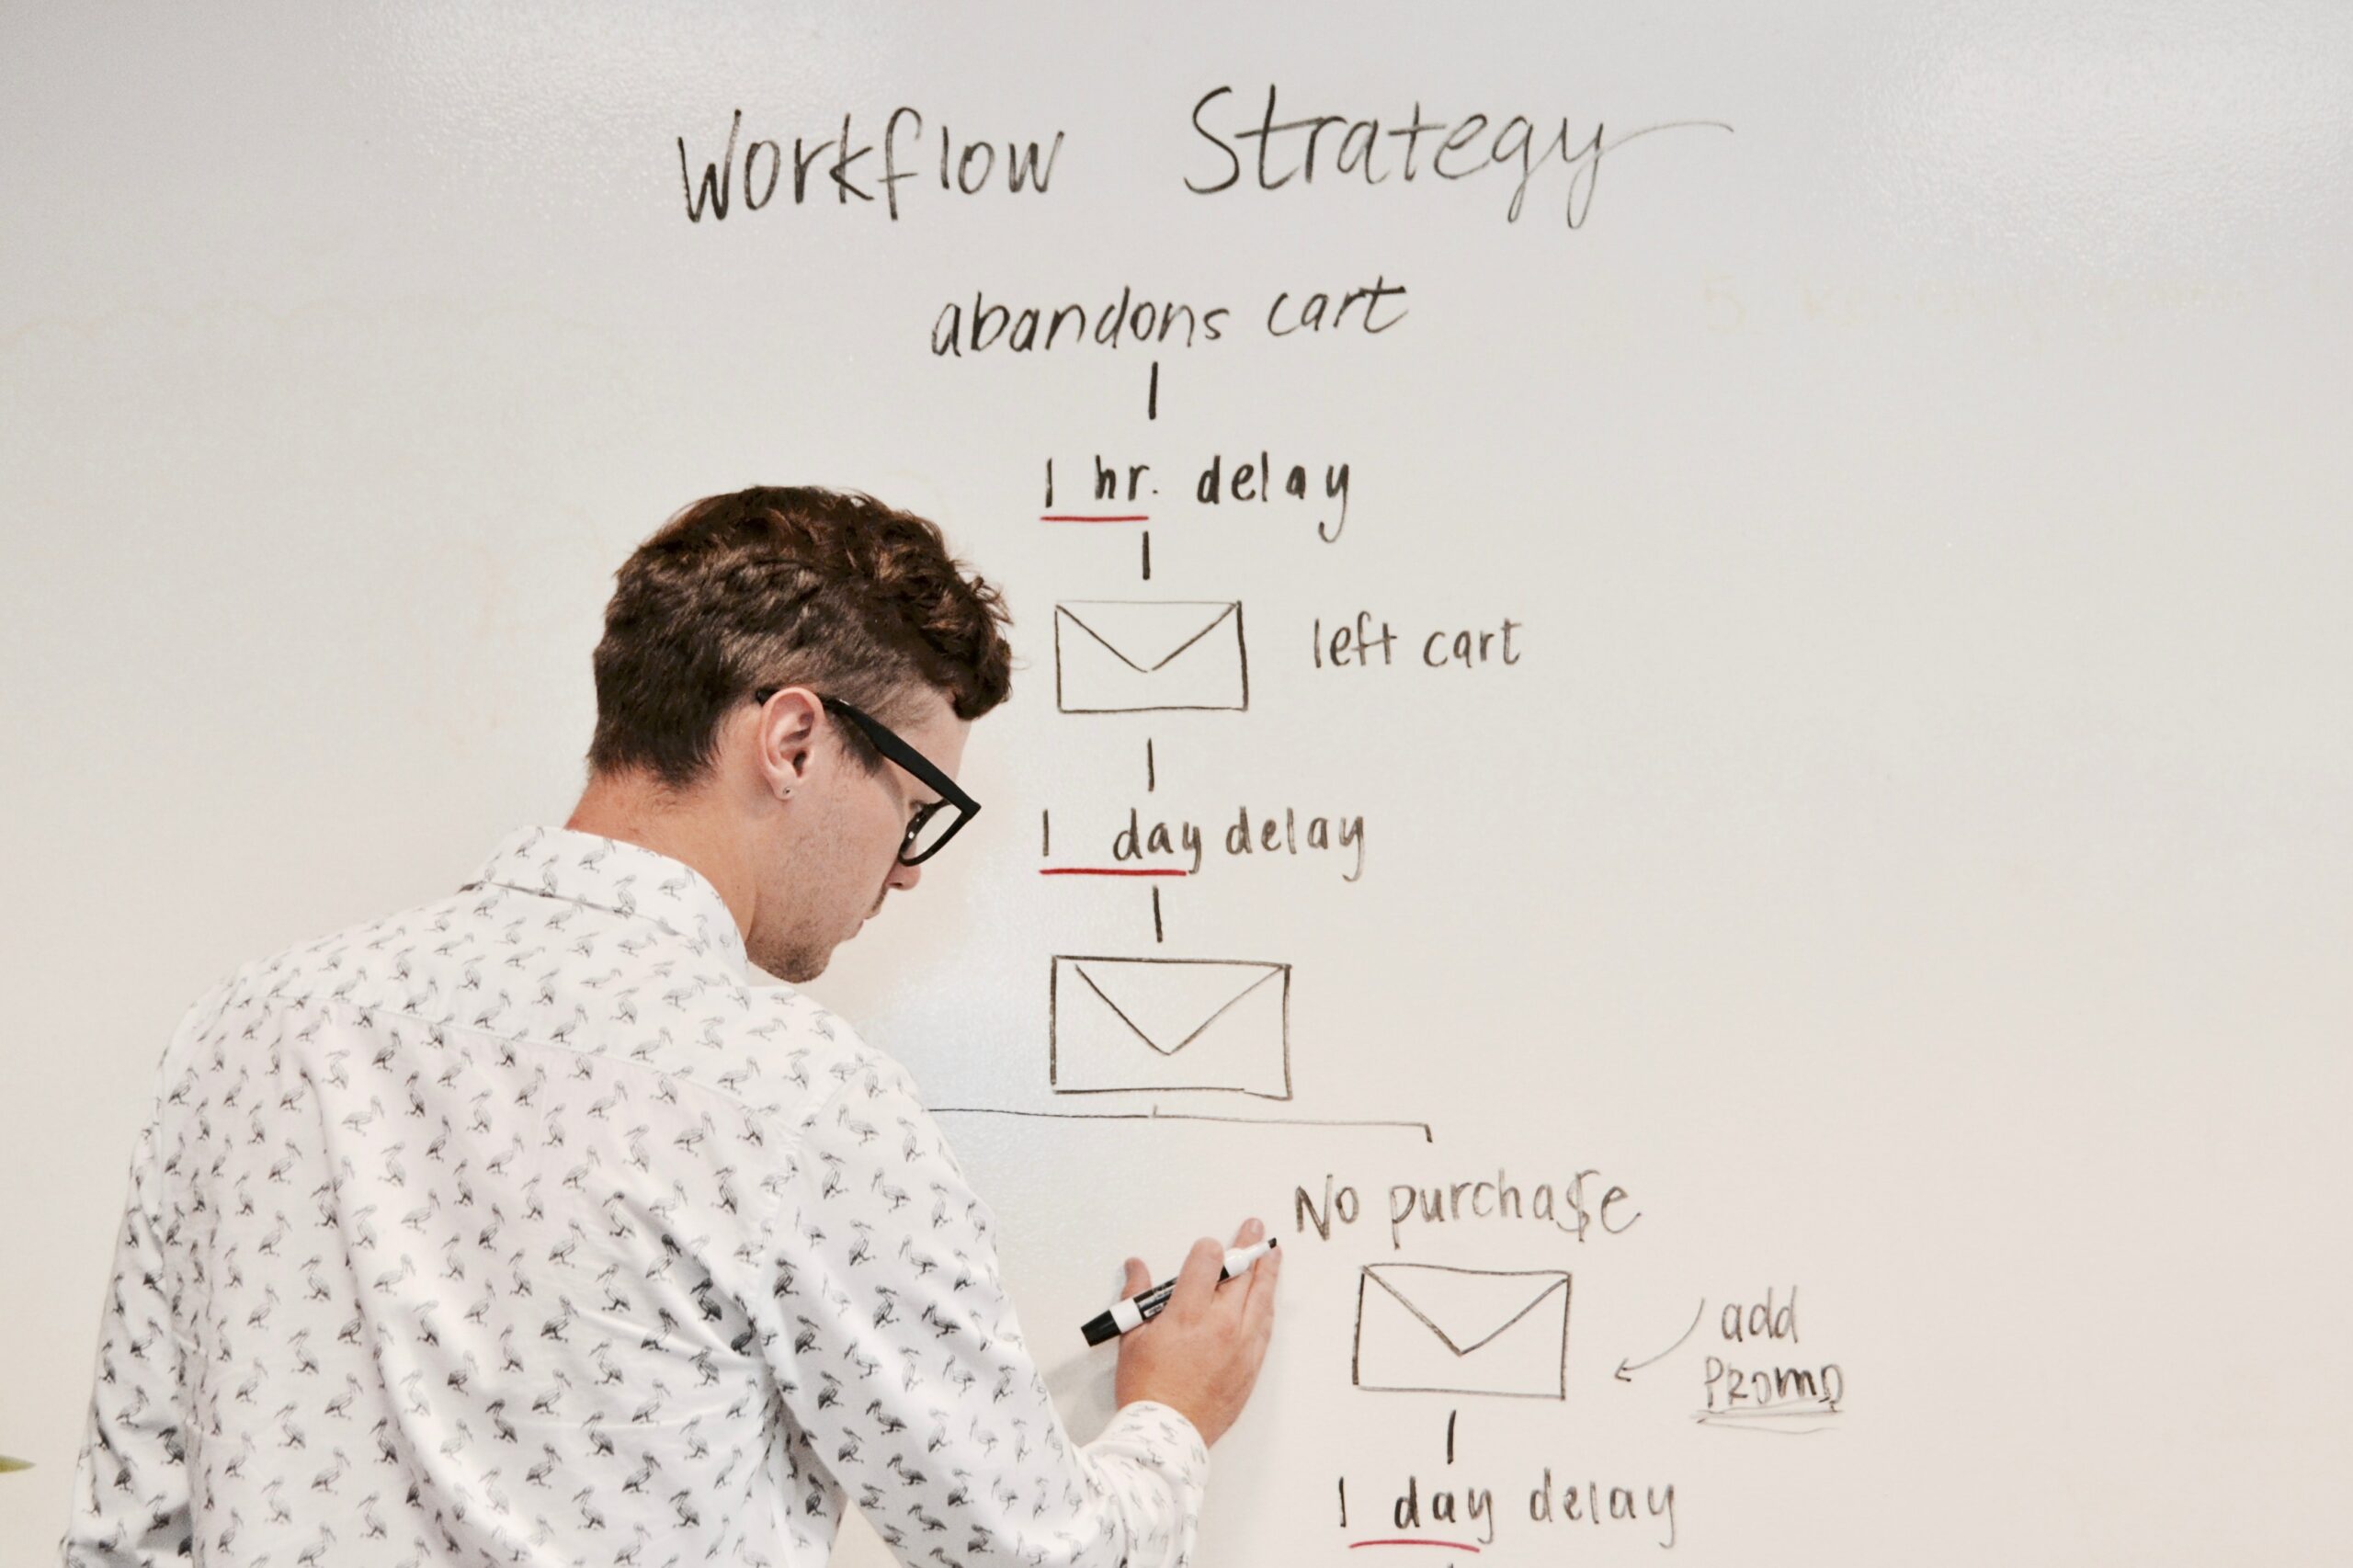 A man writing on a whiteboard with the words workflow strategy, explaining the concept of business process automation.